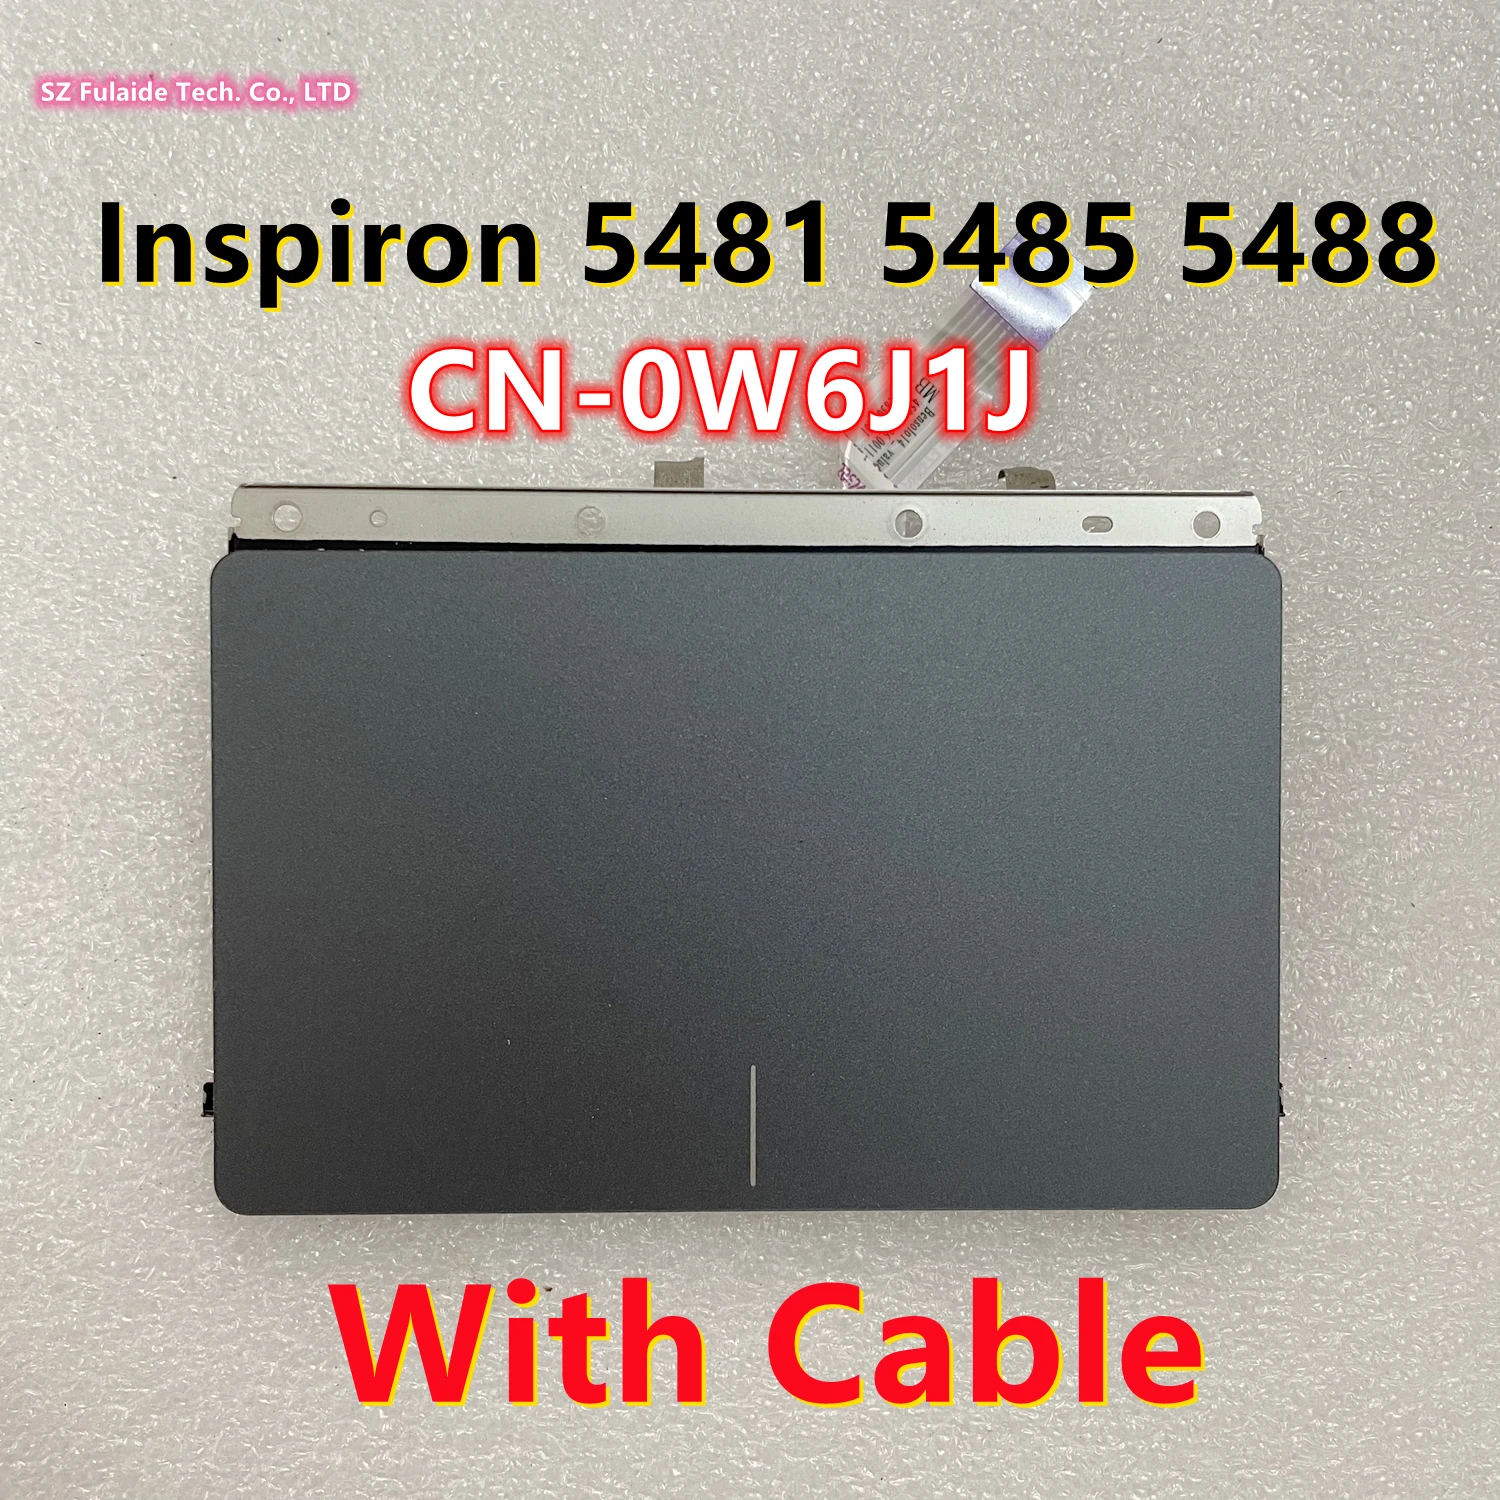 

CN-0W6J1J 0W6J1J For dell Inspiron 5481 5485 5488 Laptop Touchpad Mouse Button Board With Cable TM-P3238-003